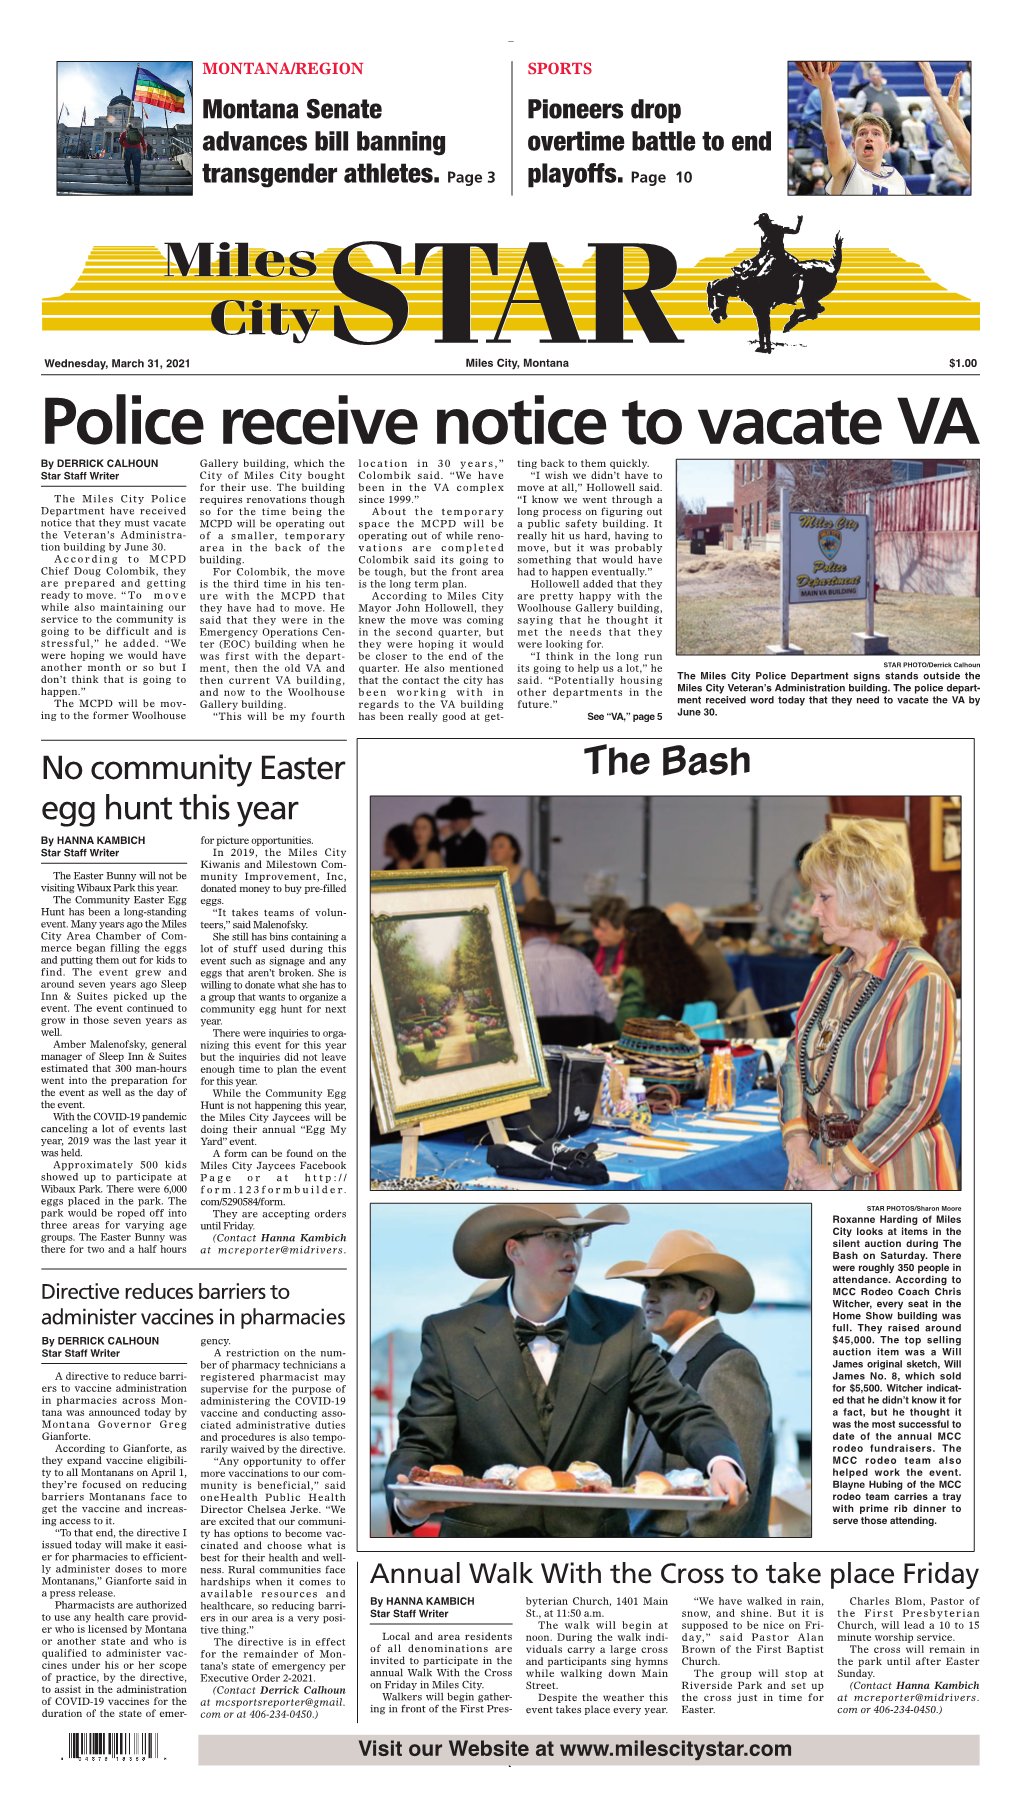 Police Receive Notice to Vacate VA by DERRICK CALHOUN Gallery Building, Which the Location in 30 Years,” Ting Back to Them Quickly